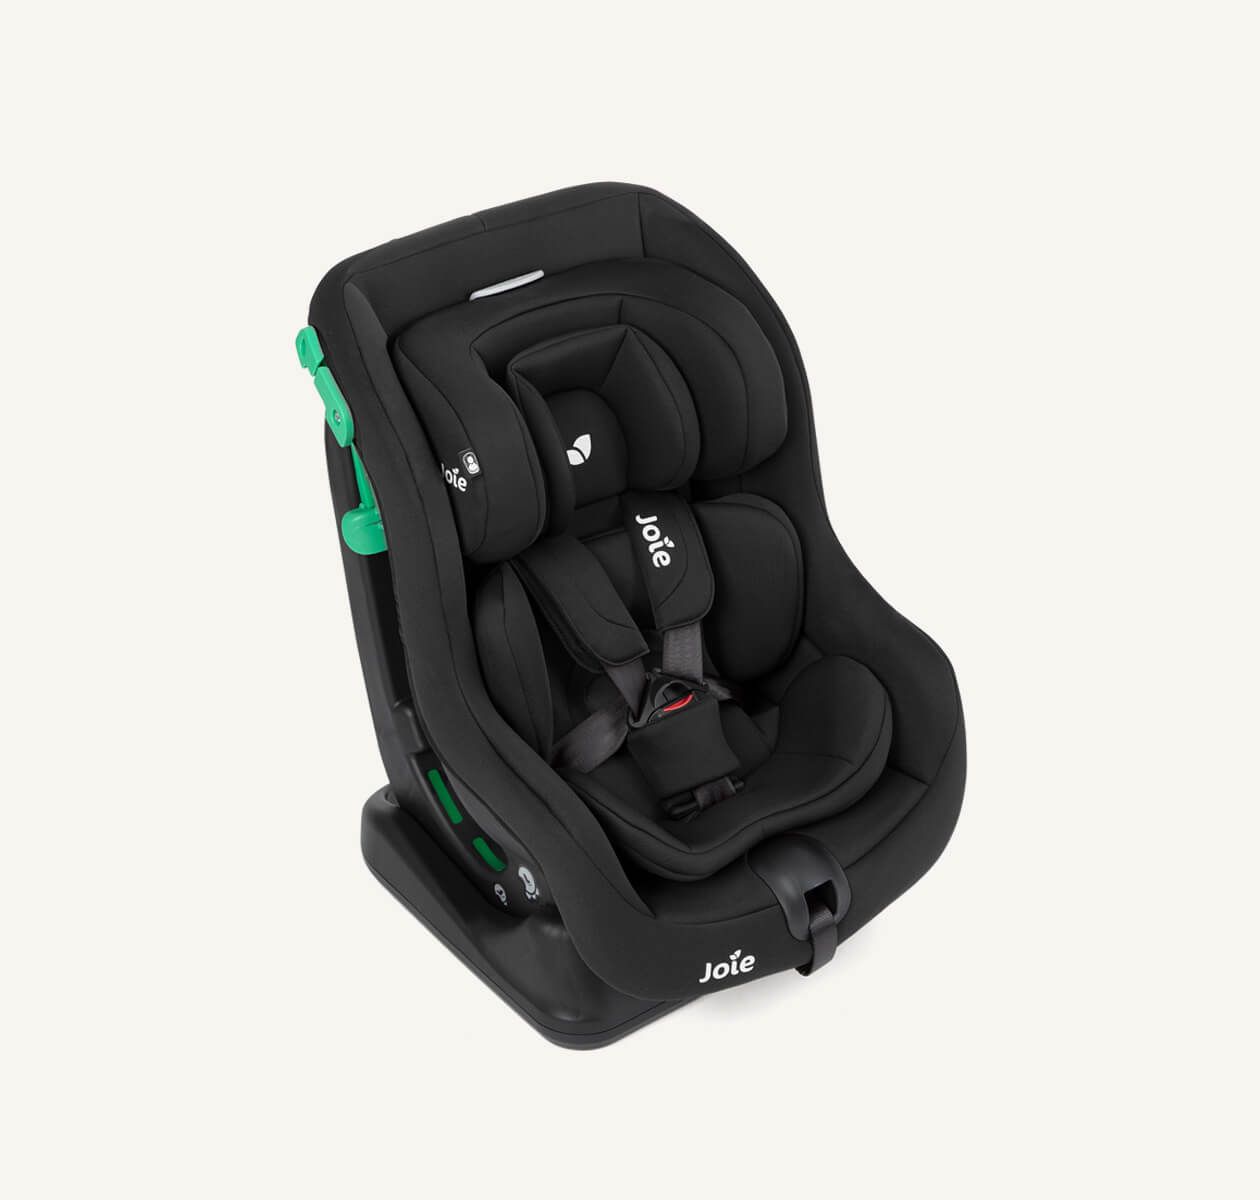 Joie Steadi R129 car seat with harness clipped in with a black colour, at an angle facing to the right.